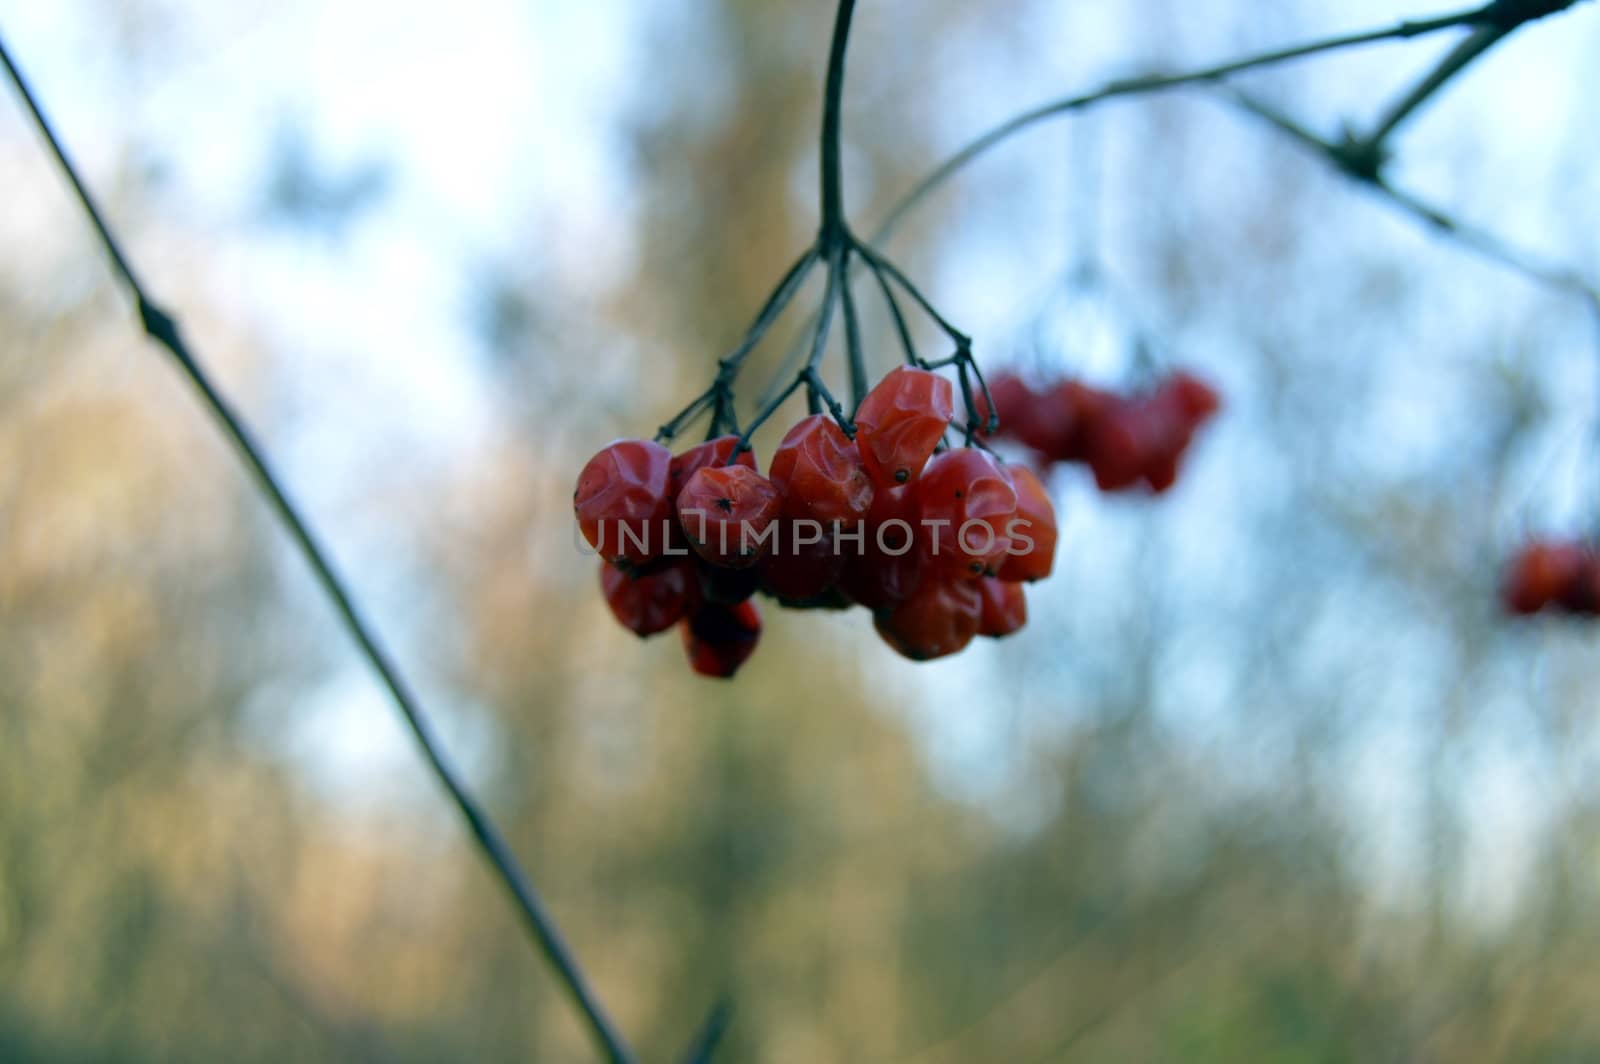 Bunch of small red berries on a blurred background